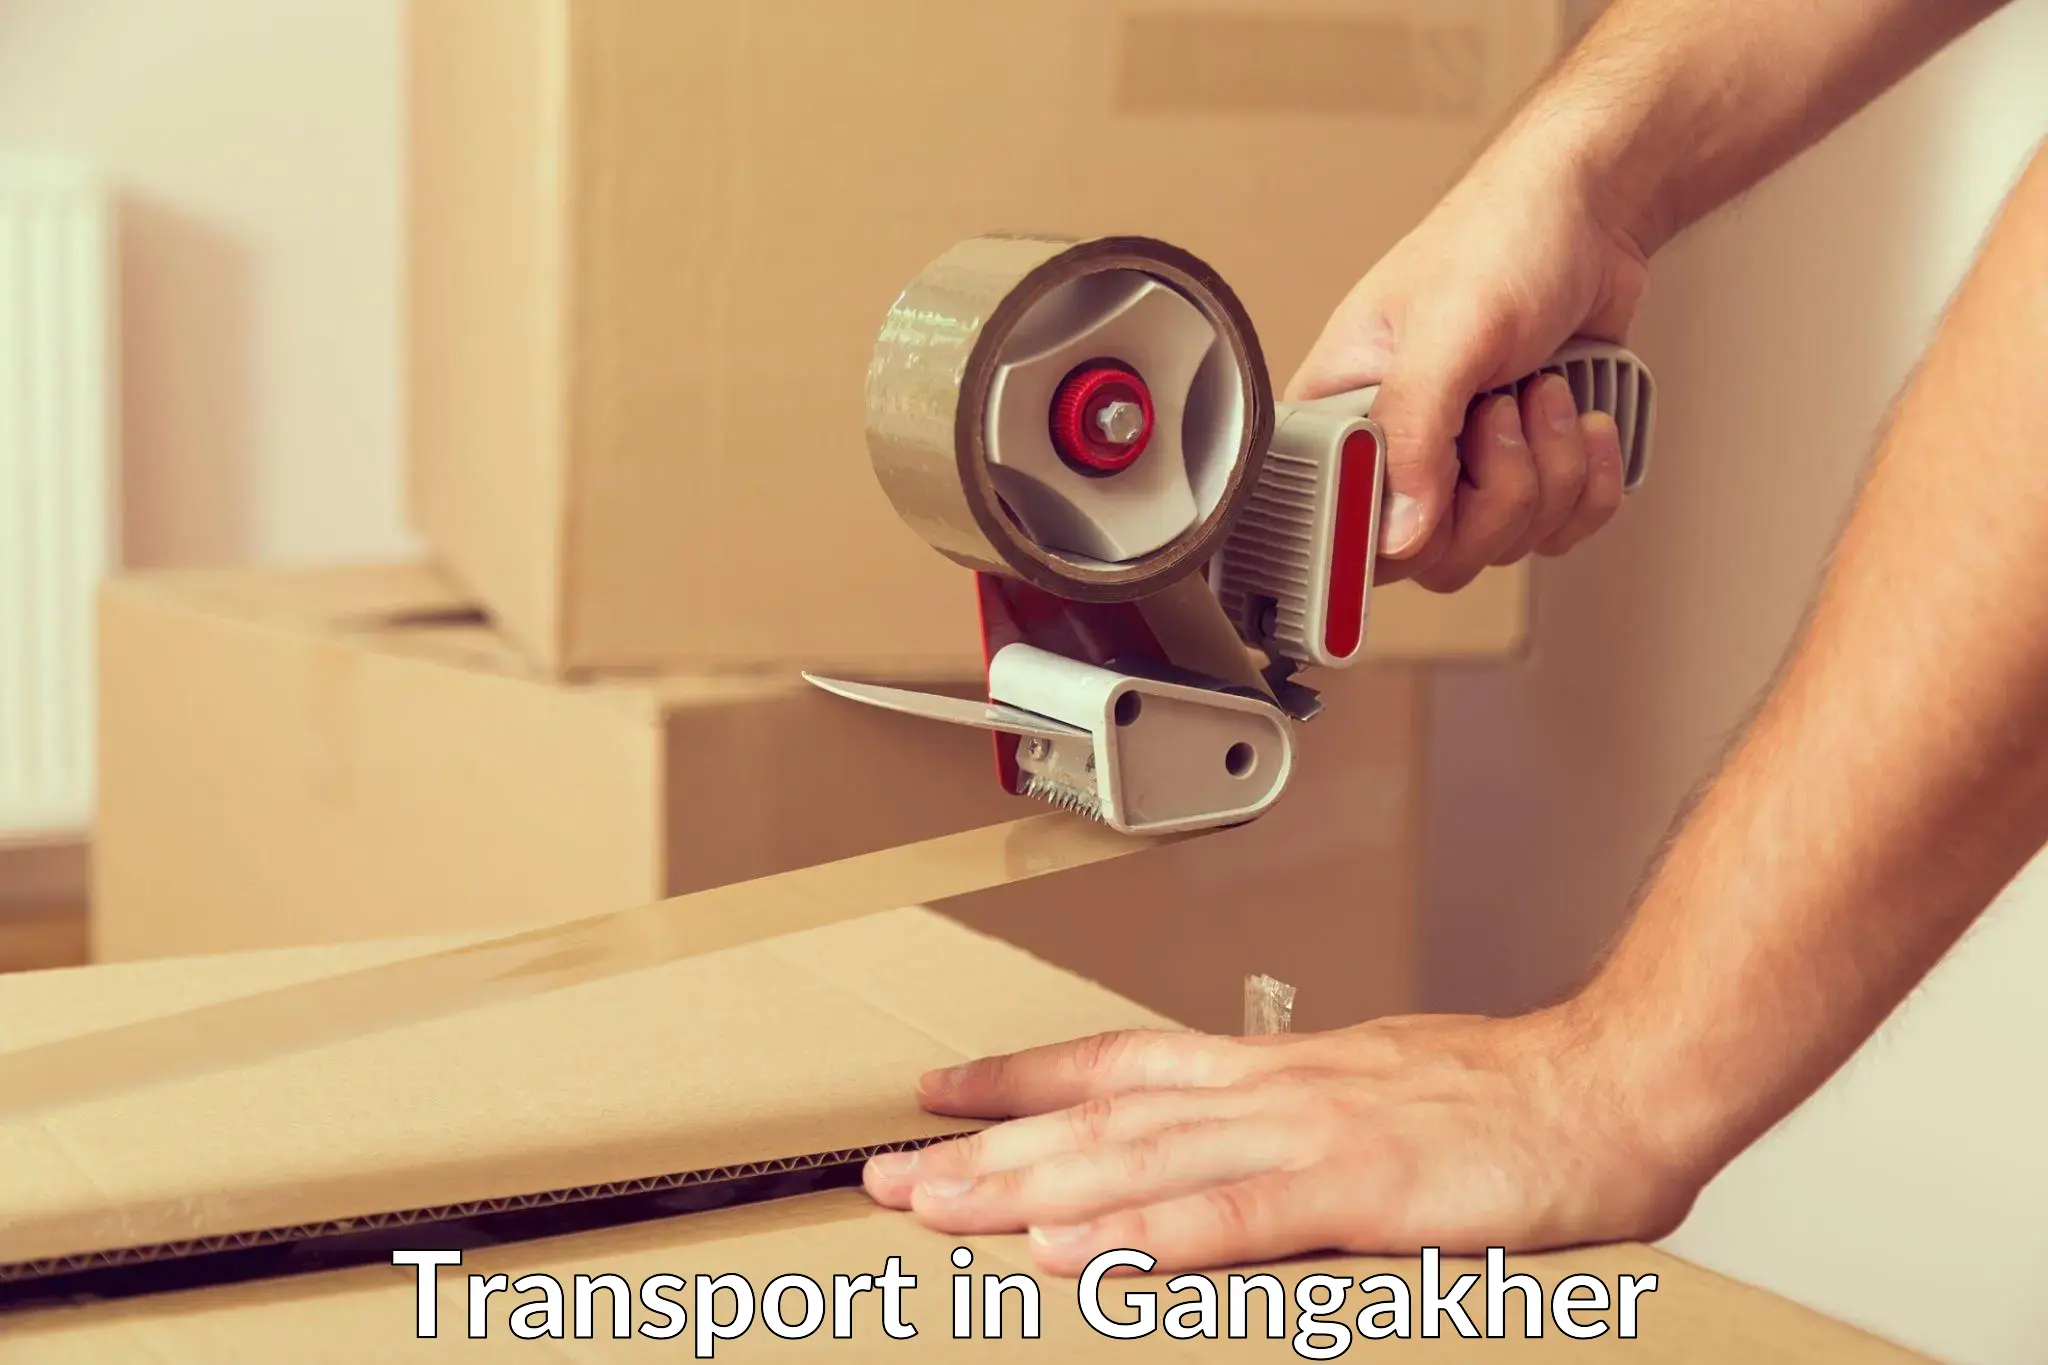 Air freight transport services in Gangakher